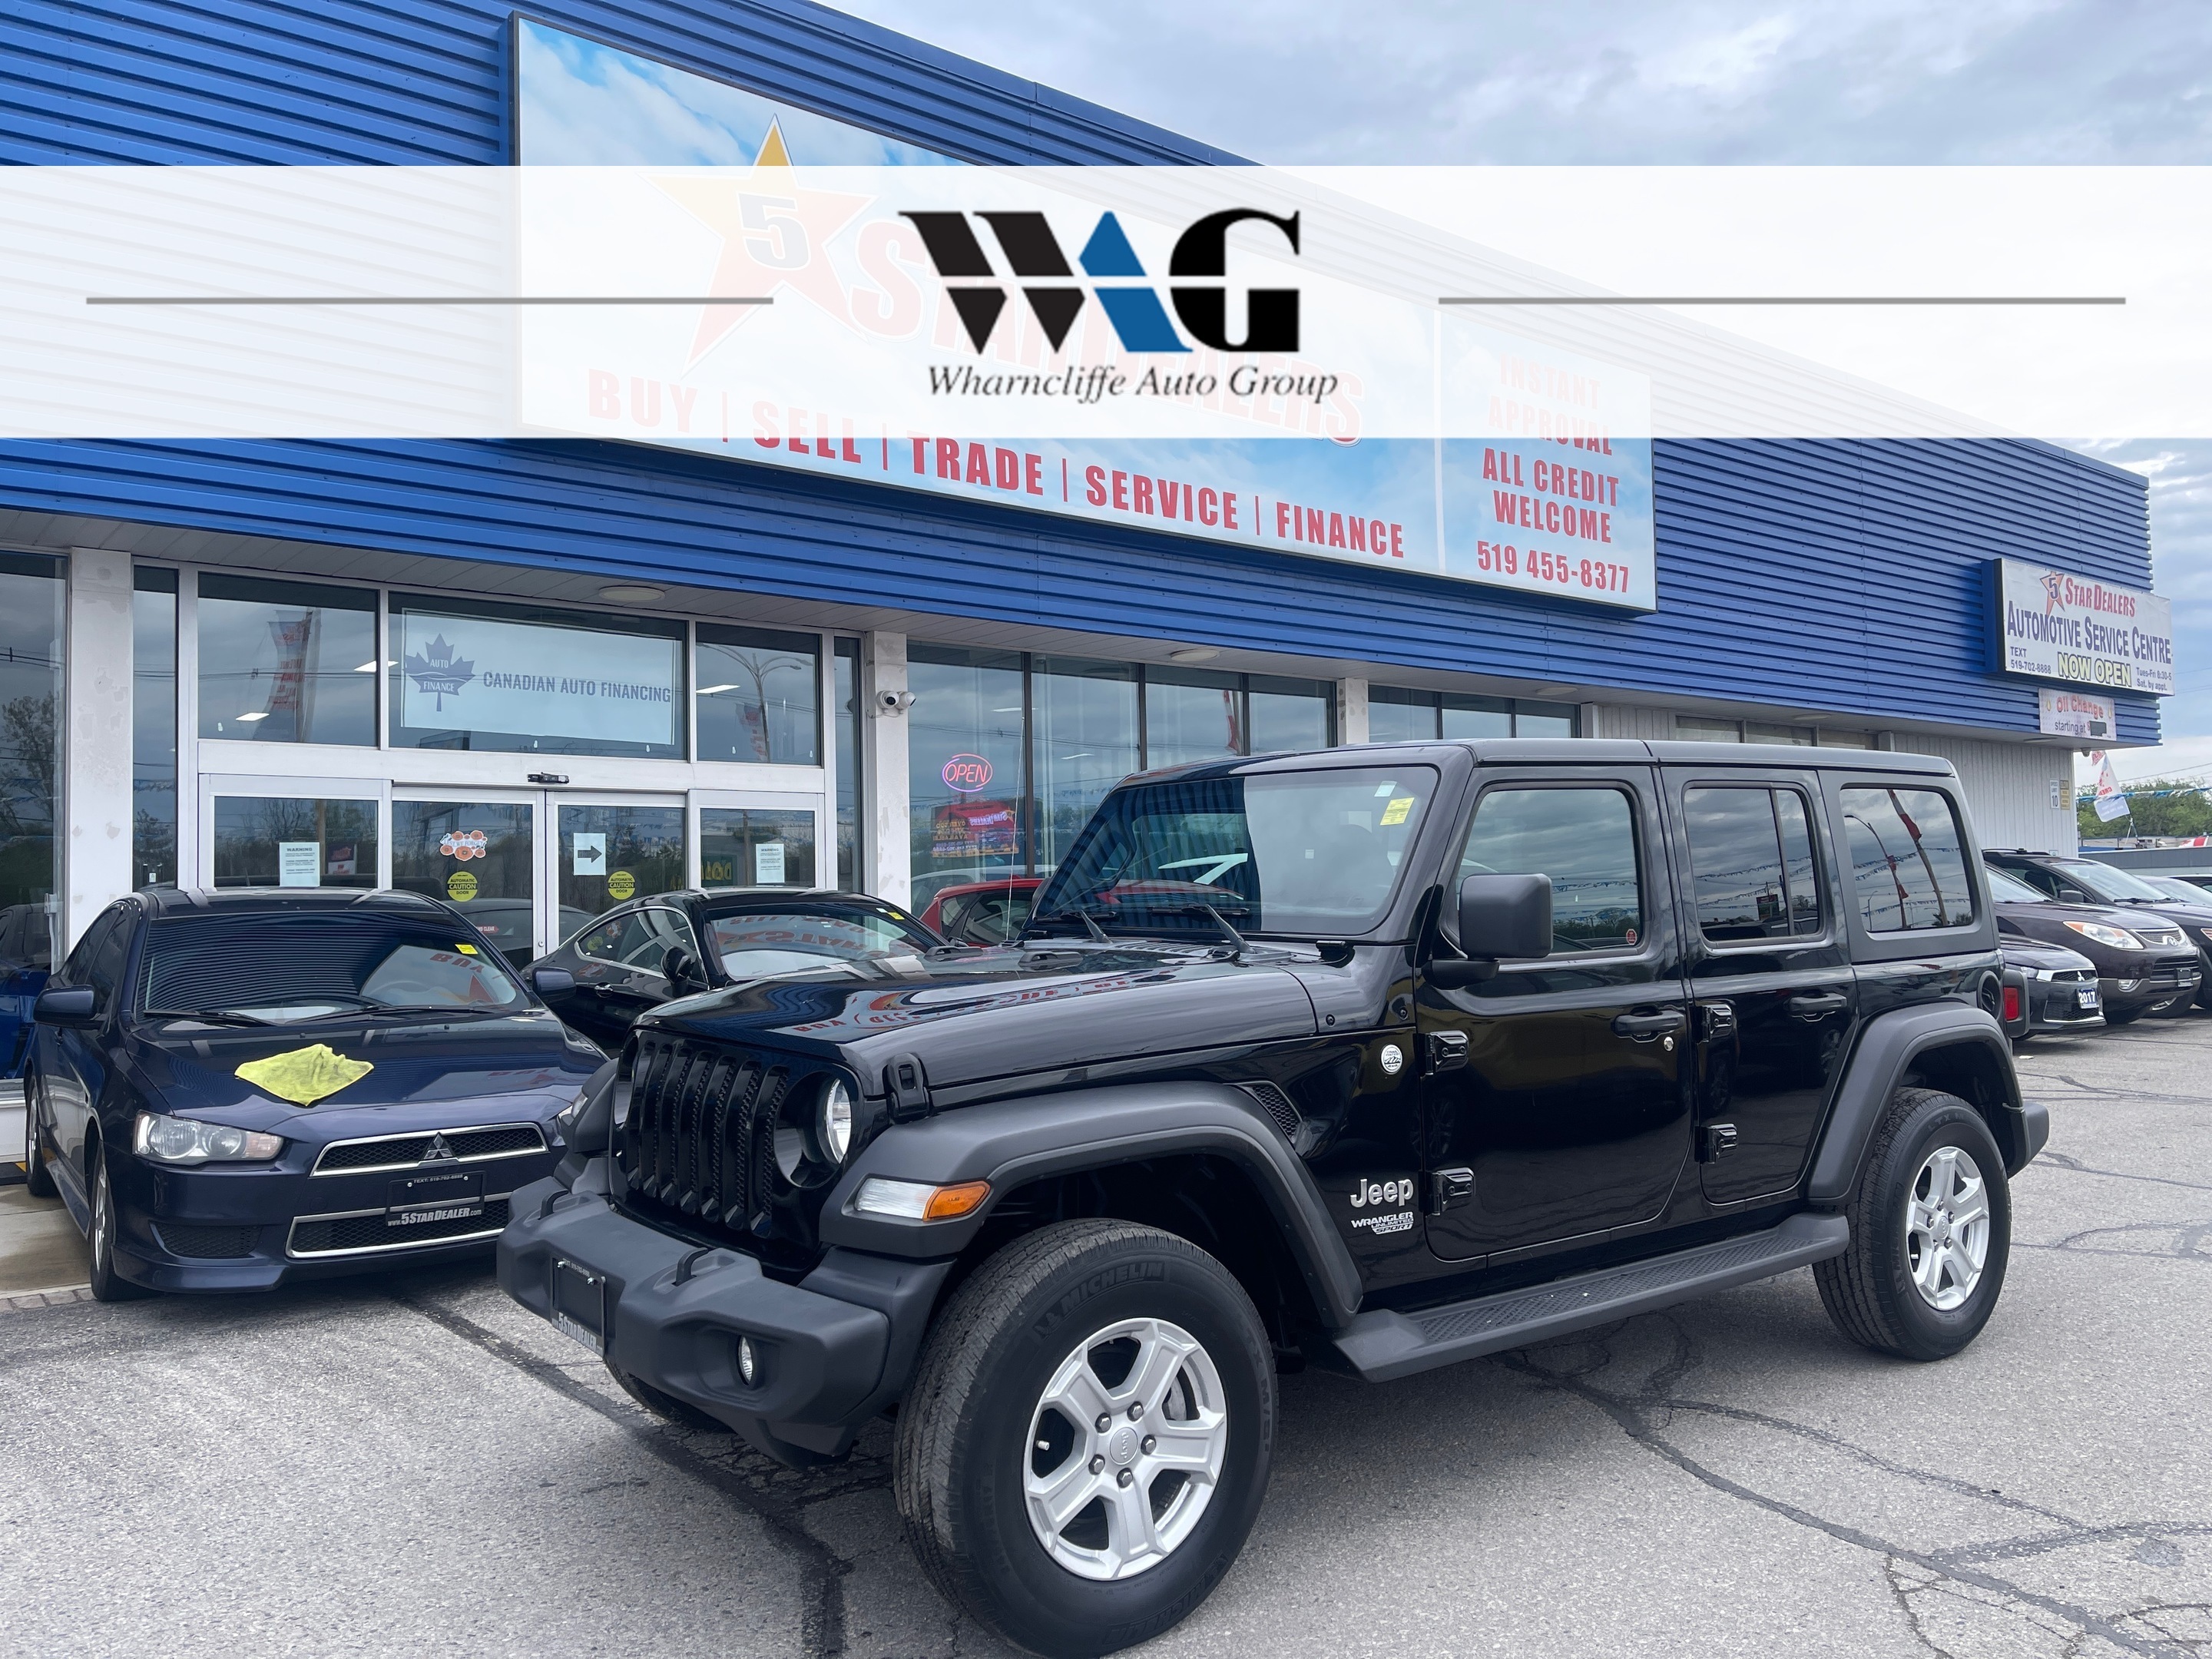 2020 Jeep WRANGLER UNLIMITED 4x4 $5000 IN FACTORY OPTIONS WE FINANCE ALL CREDIT